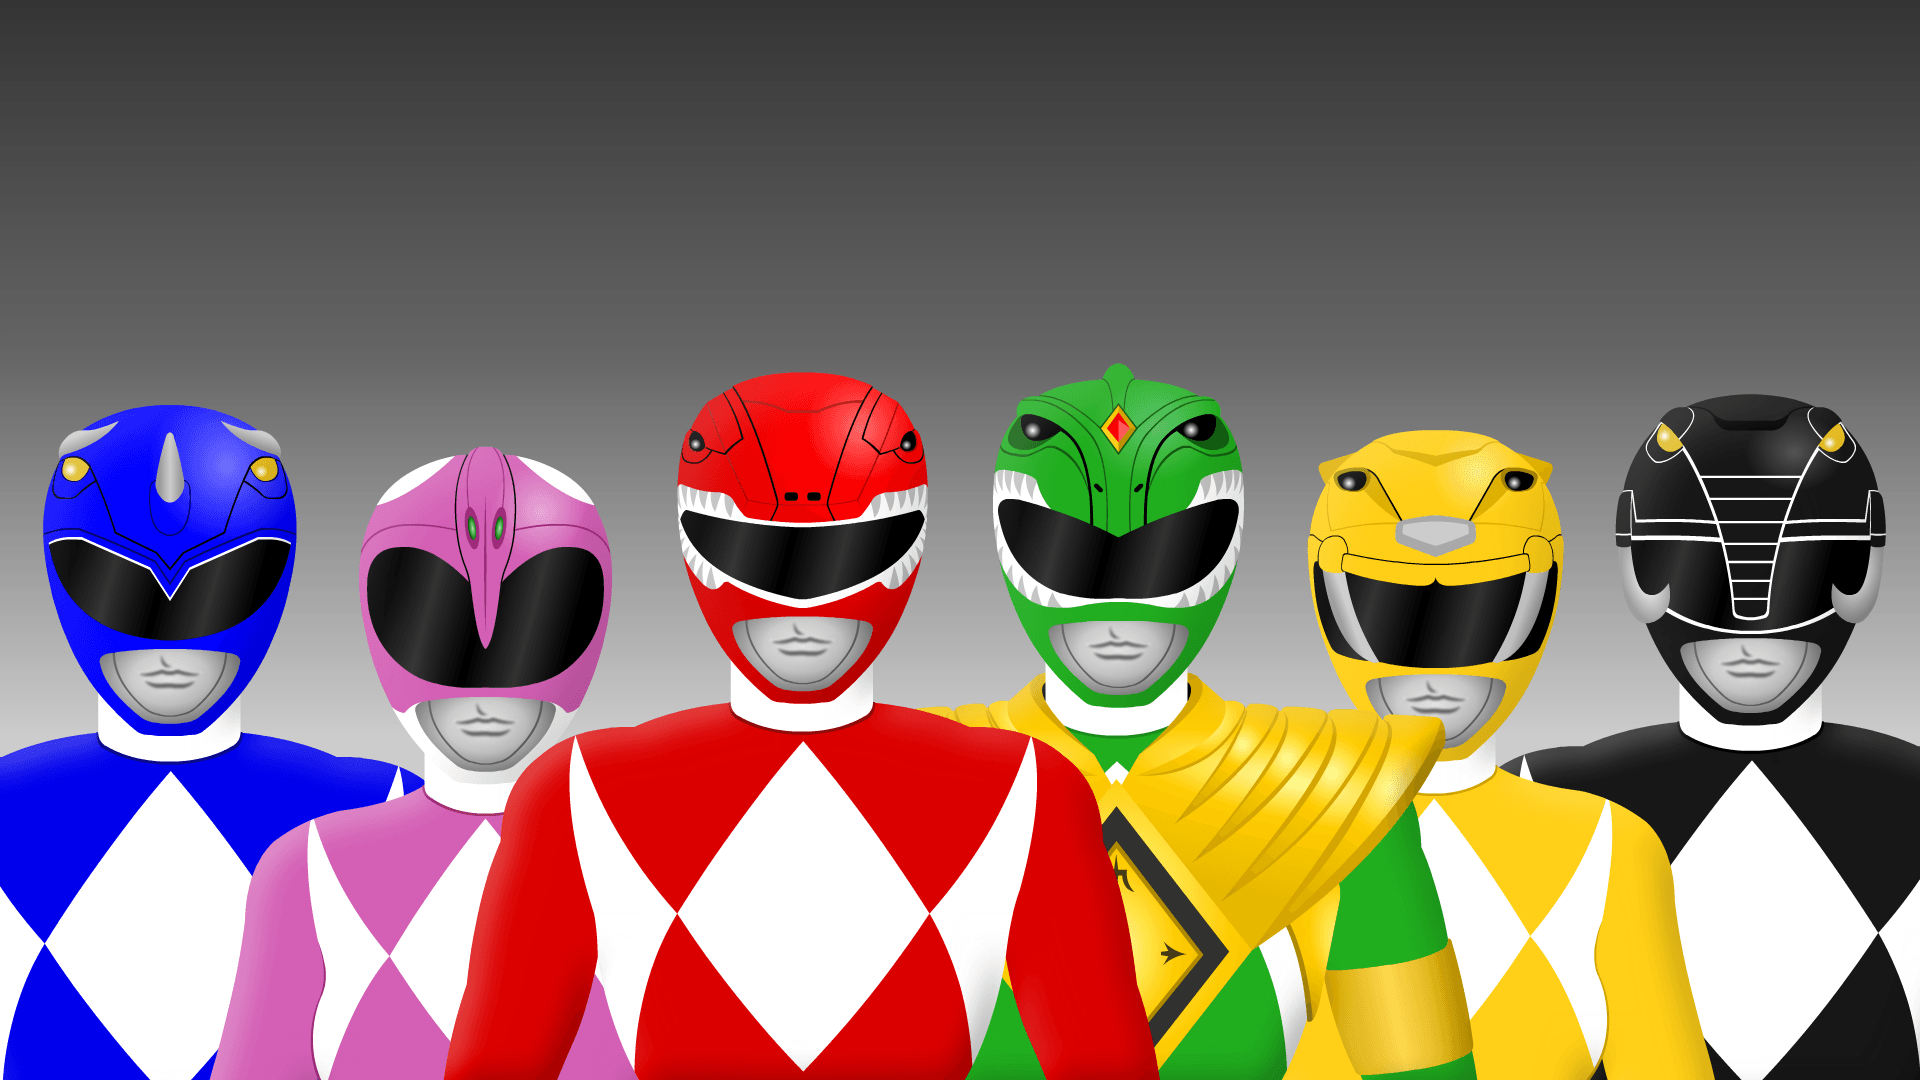 Mighty Morphin Power Rangers Wallpapers 20+.